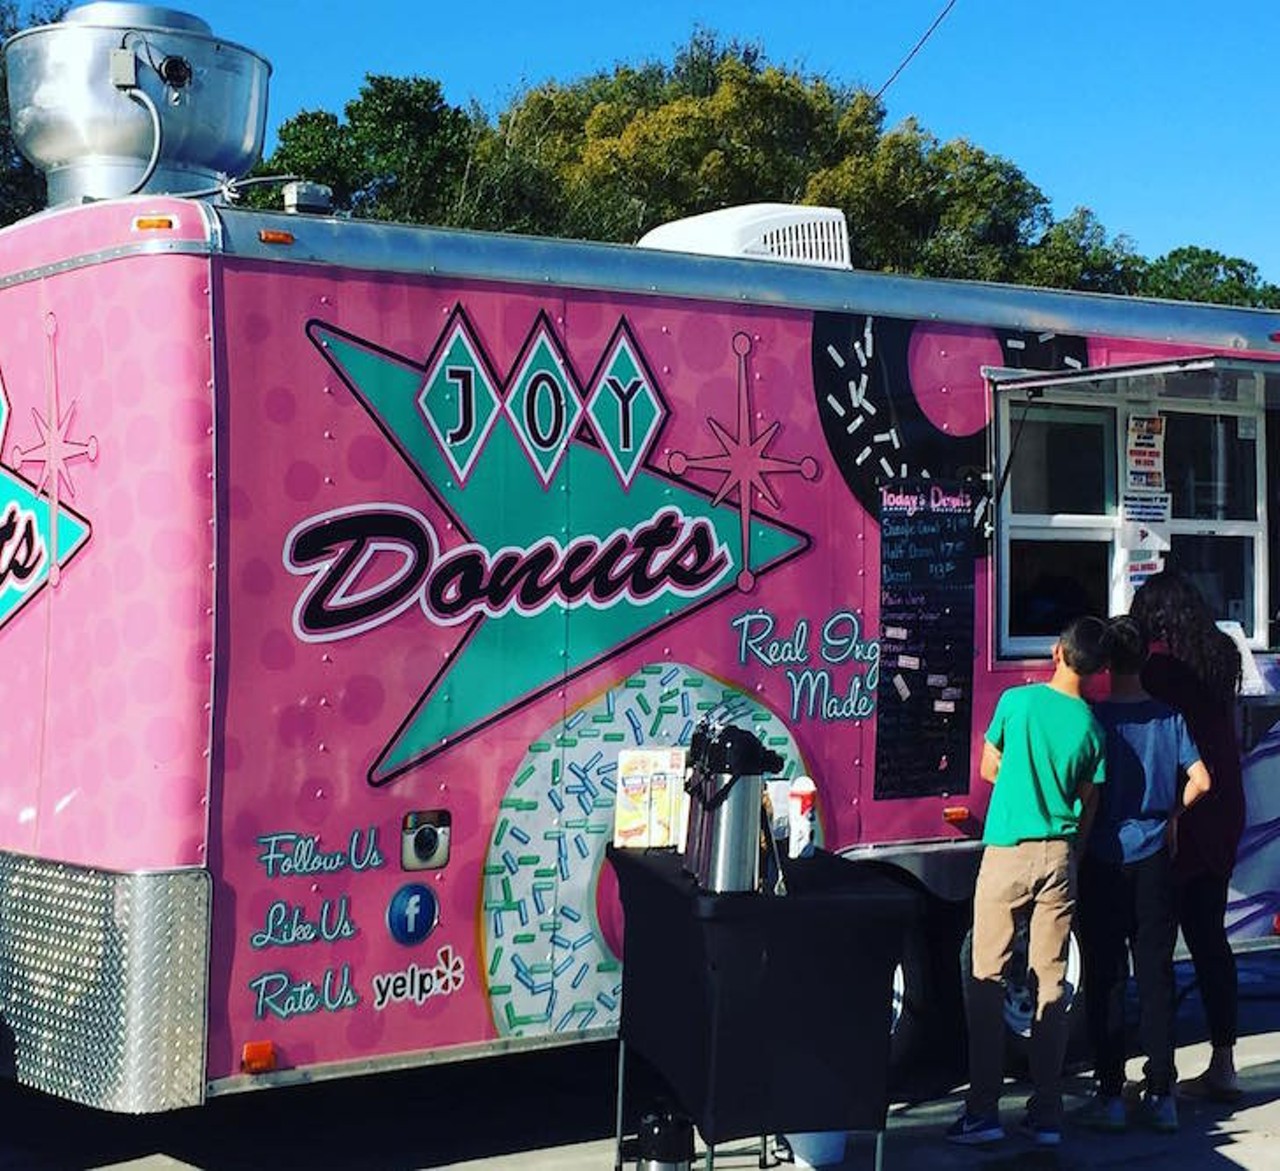 Joy Donuts
Intersection of 441 and Wolf Branch Road, Mount Dora (330) 692-0035
The moist, light, fluffy cake doughnuts served from the little pink truck will make a believer out of raised-yeast doughnut loyalists. Try the blueberry dip or the vanilla crack and see.
Photo via jdubwee/Instagram